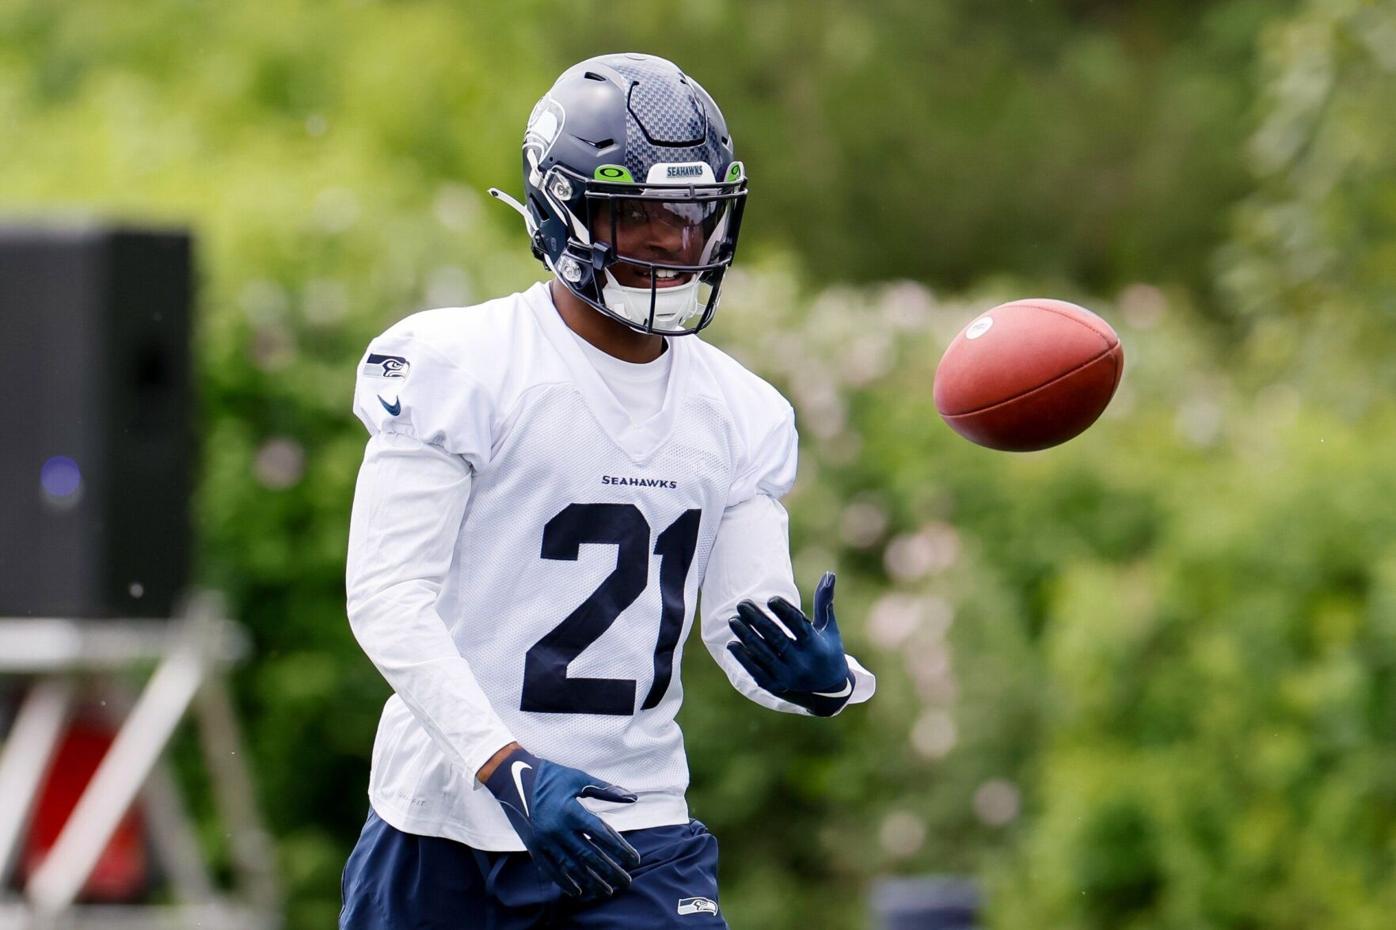 Report: Devon Witherspoon, Seahawks' top draft pick, expected to hold out  to start training camp, Seahawks